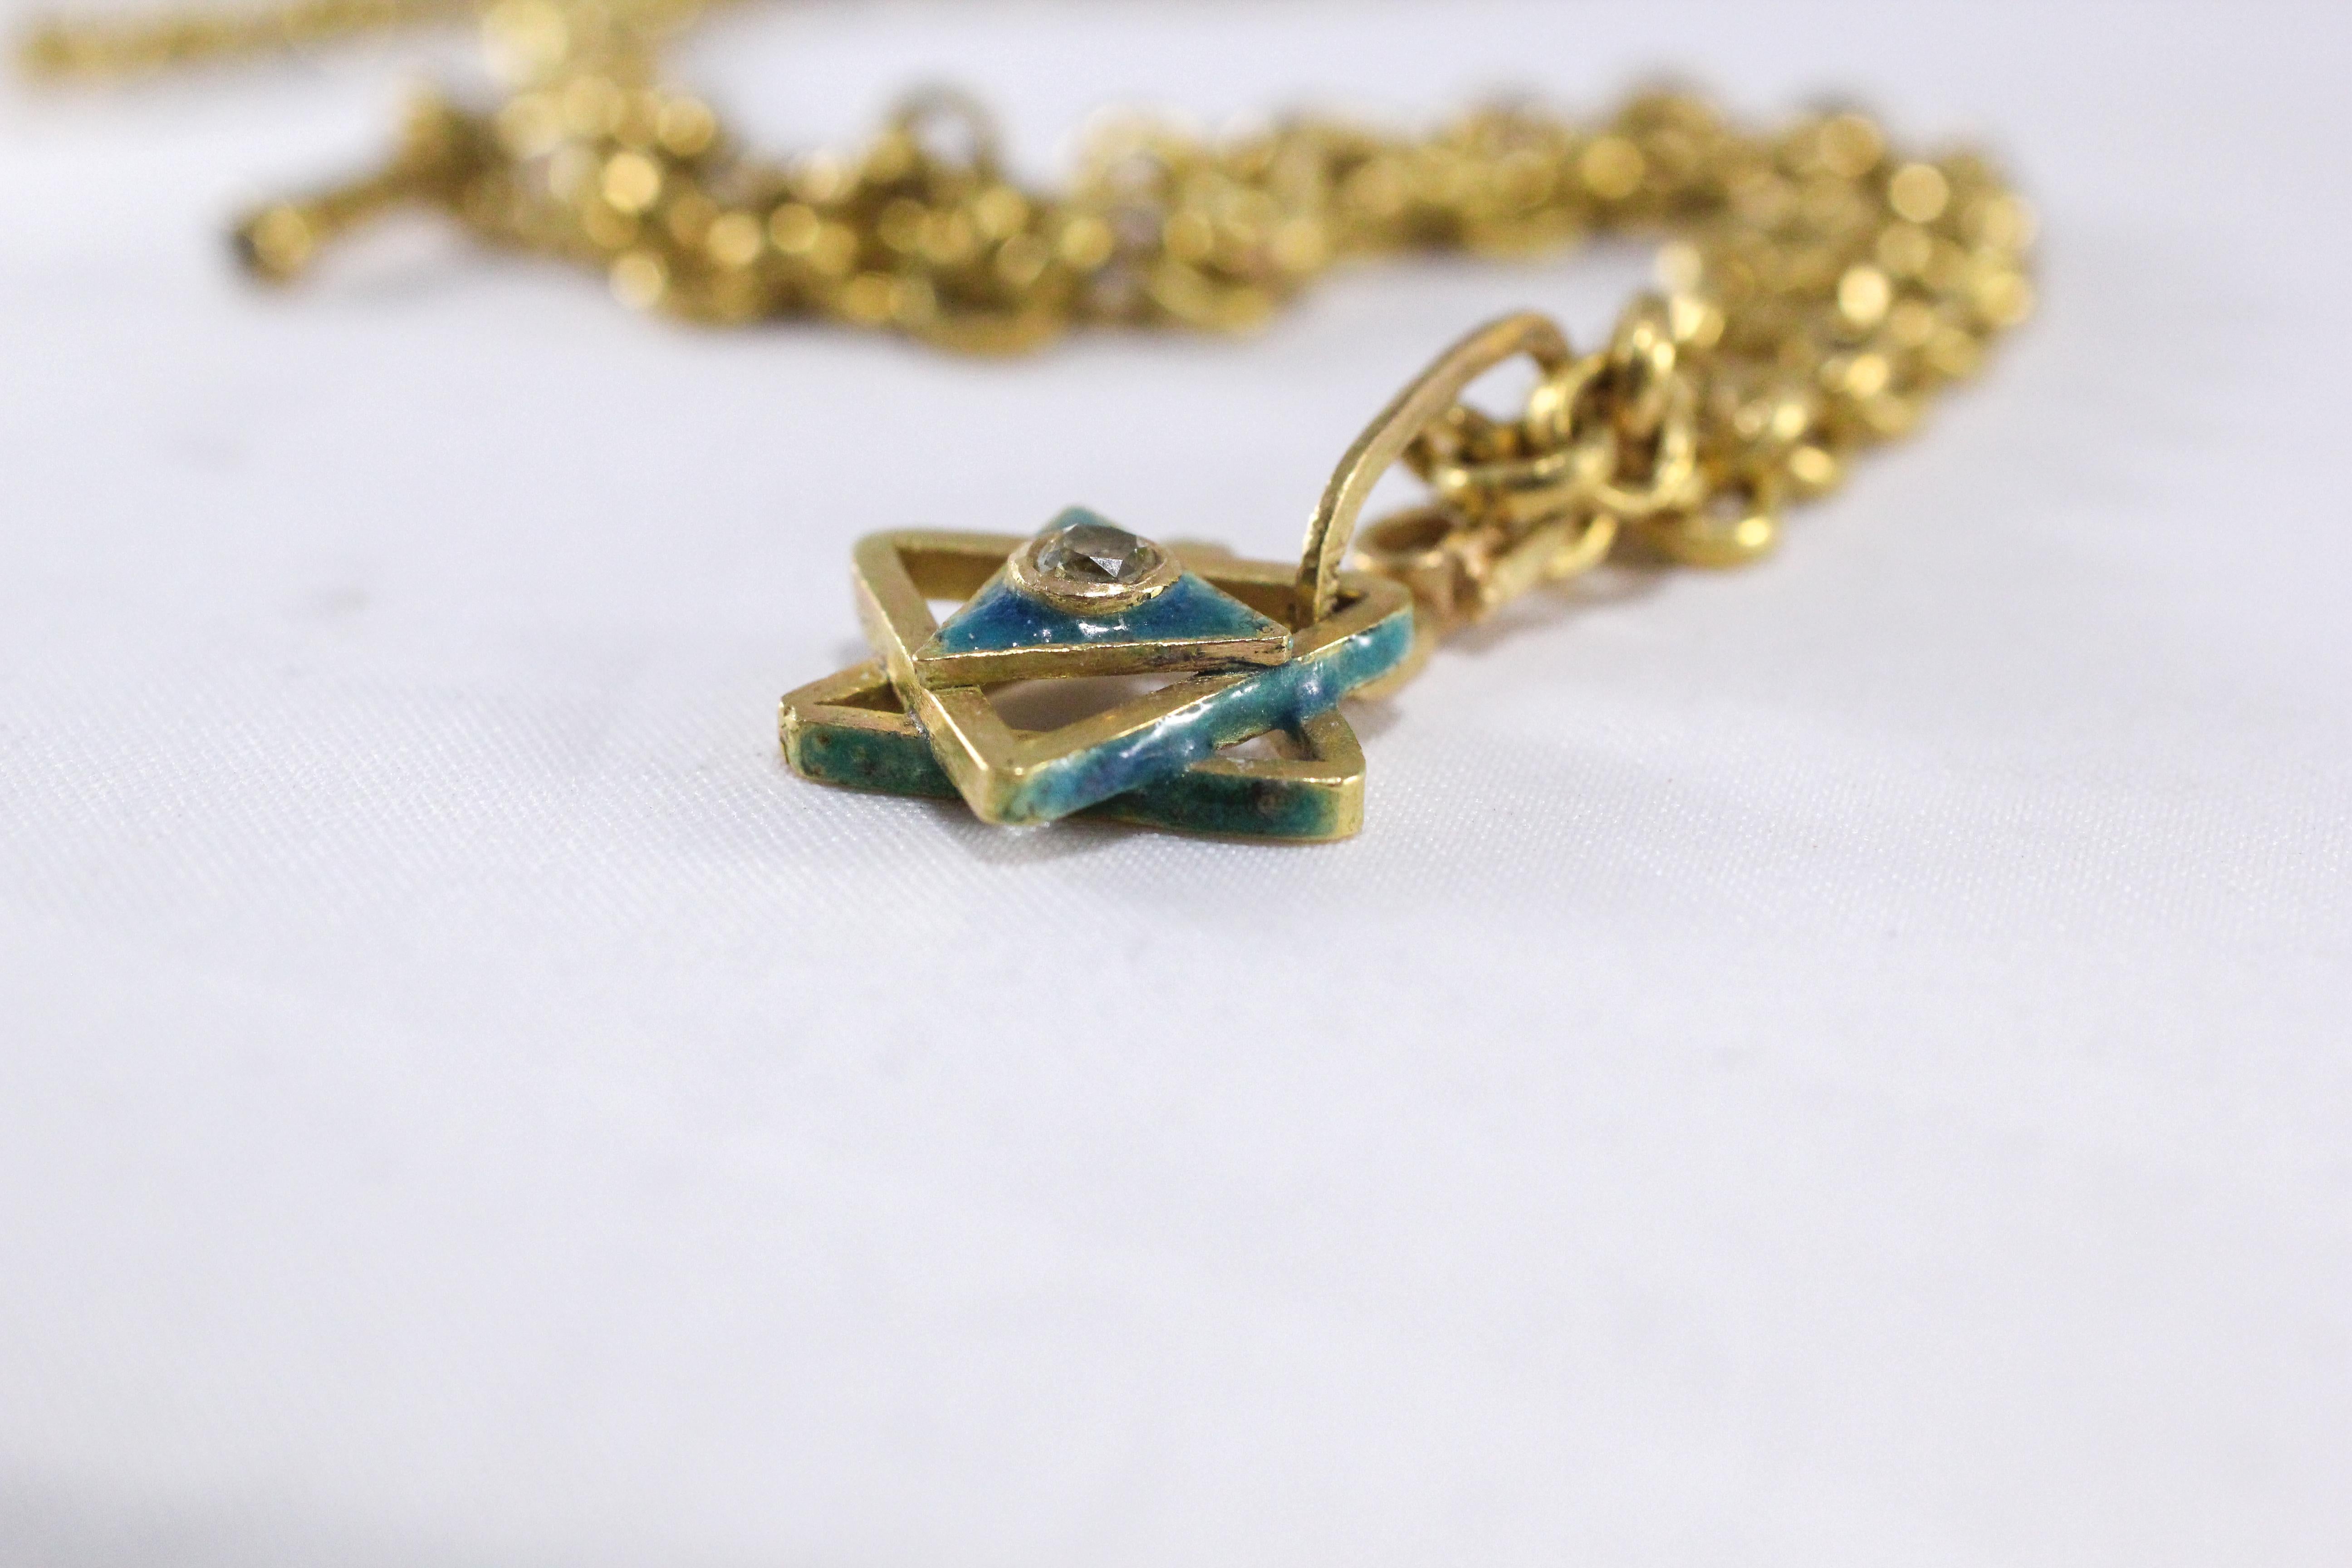 Enamel Magen David 18K Gold Chain Necklace Diamond Enhancer and Toggle Clasp For Sale 4